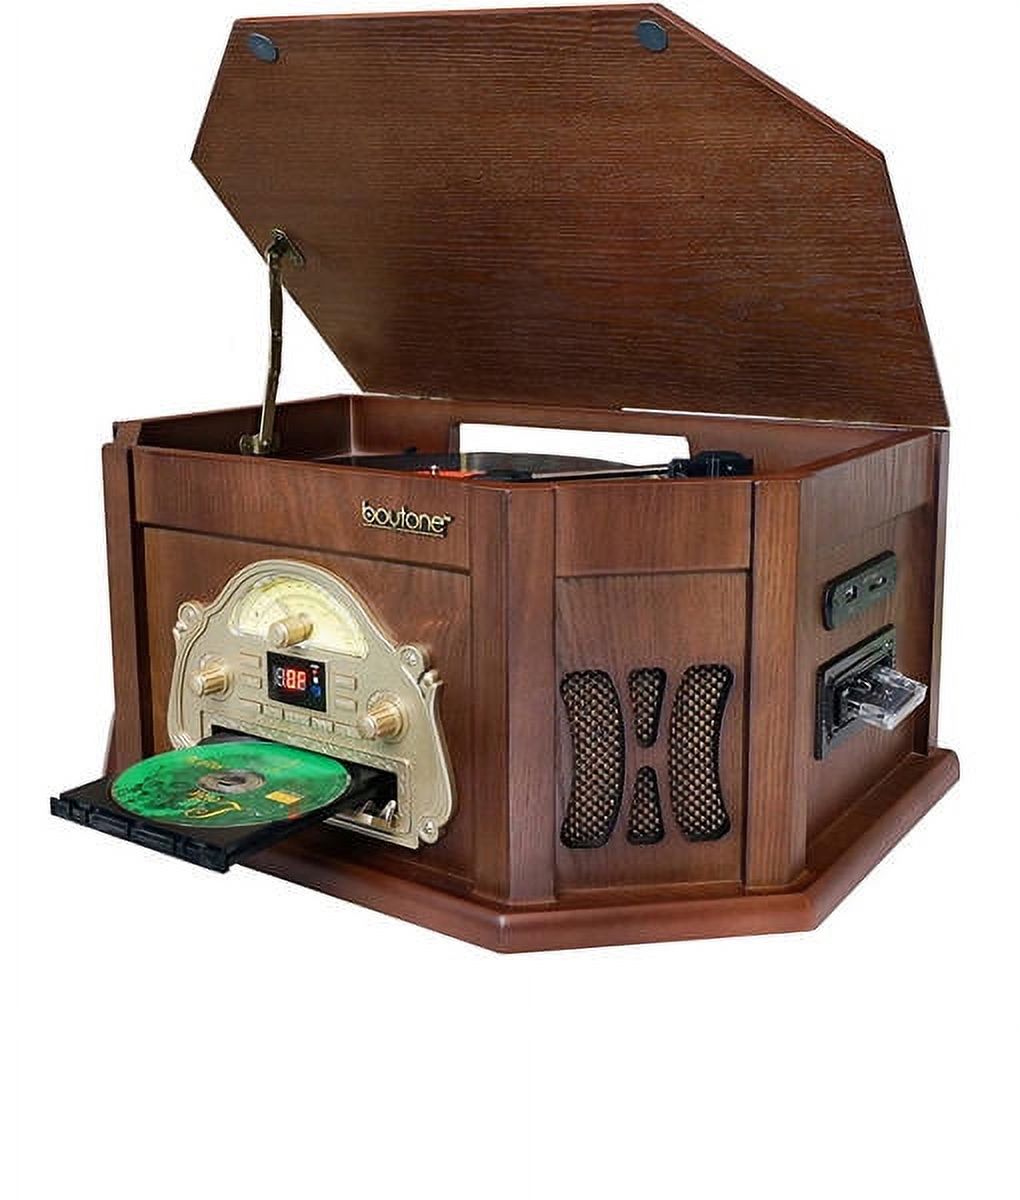 Boytone BT-25MB 8-in-1 Natural Wood Classic Turntable Stereo System with Bluetooth Connection, Vinyl Record Player, AM/FM, CD, Cassette, USB, SD Slot. 2 Built-in Speakers, Remote Control, MP3 Player - image 1 of 8